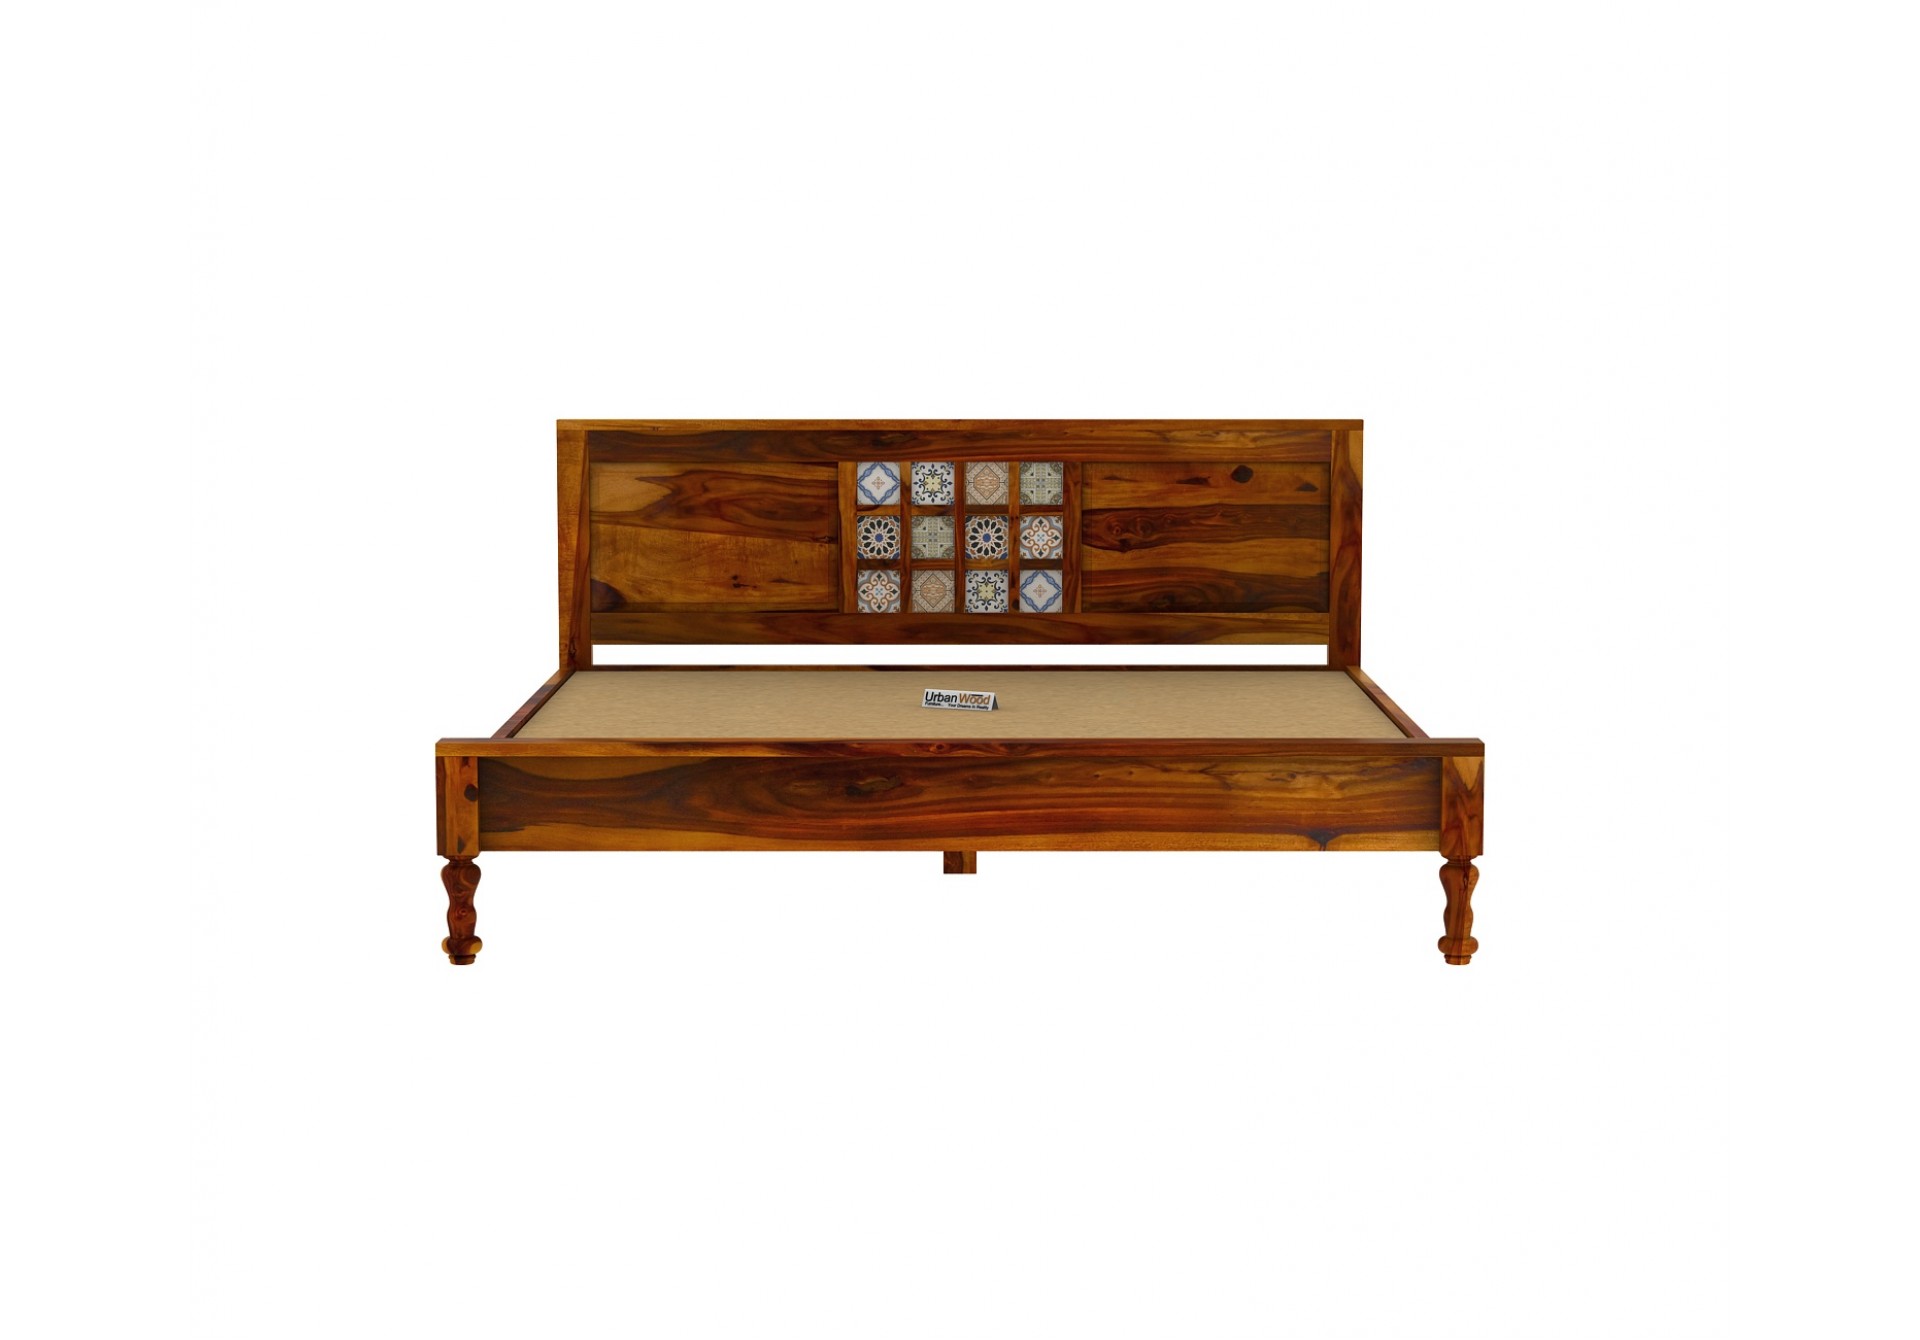 Relay Wooden Bed Without Storage ( King Size, Honey Finish )